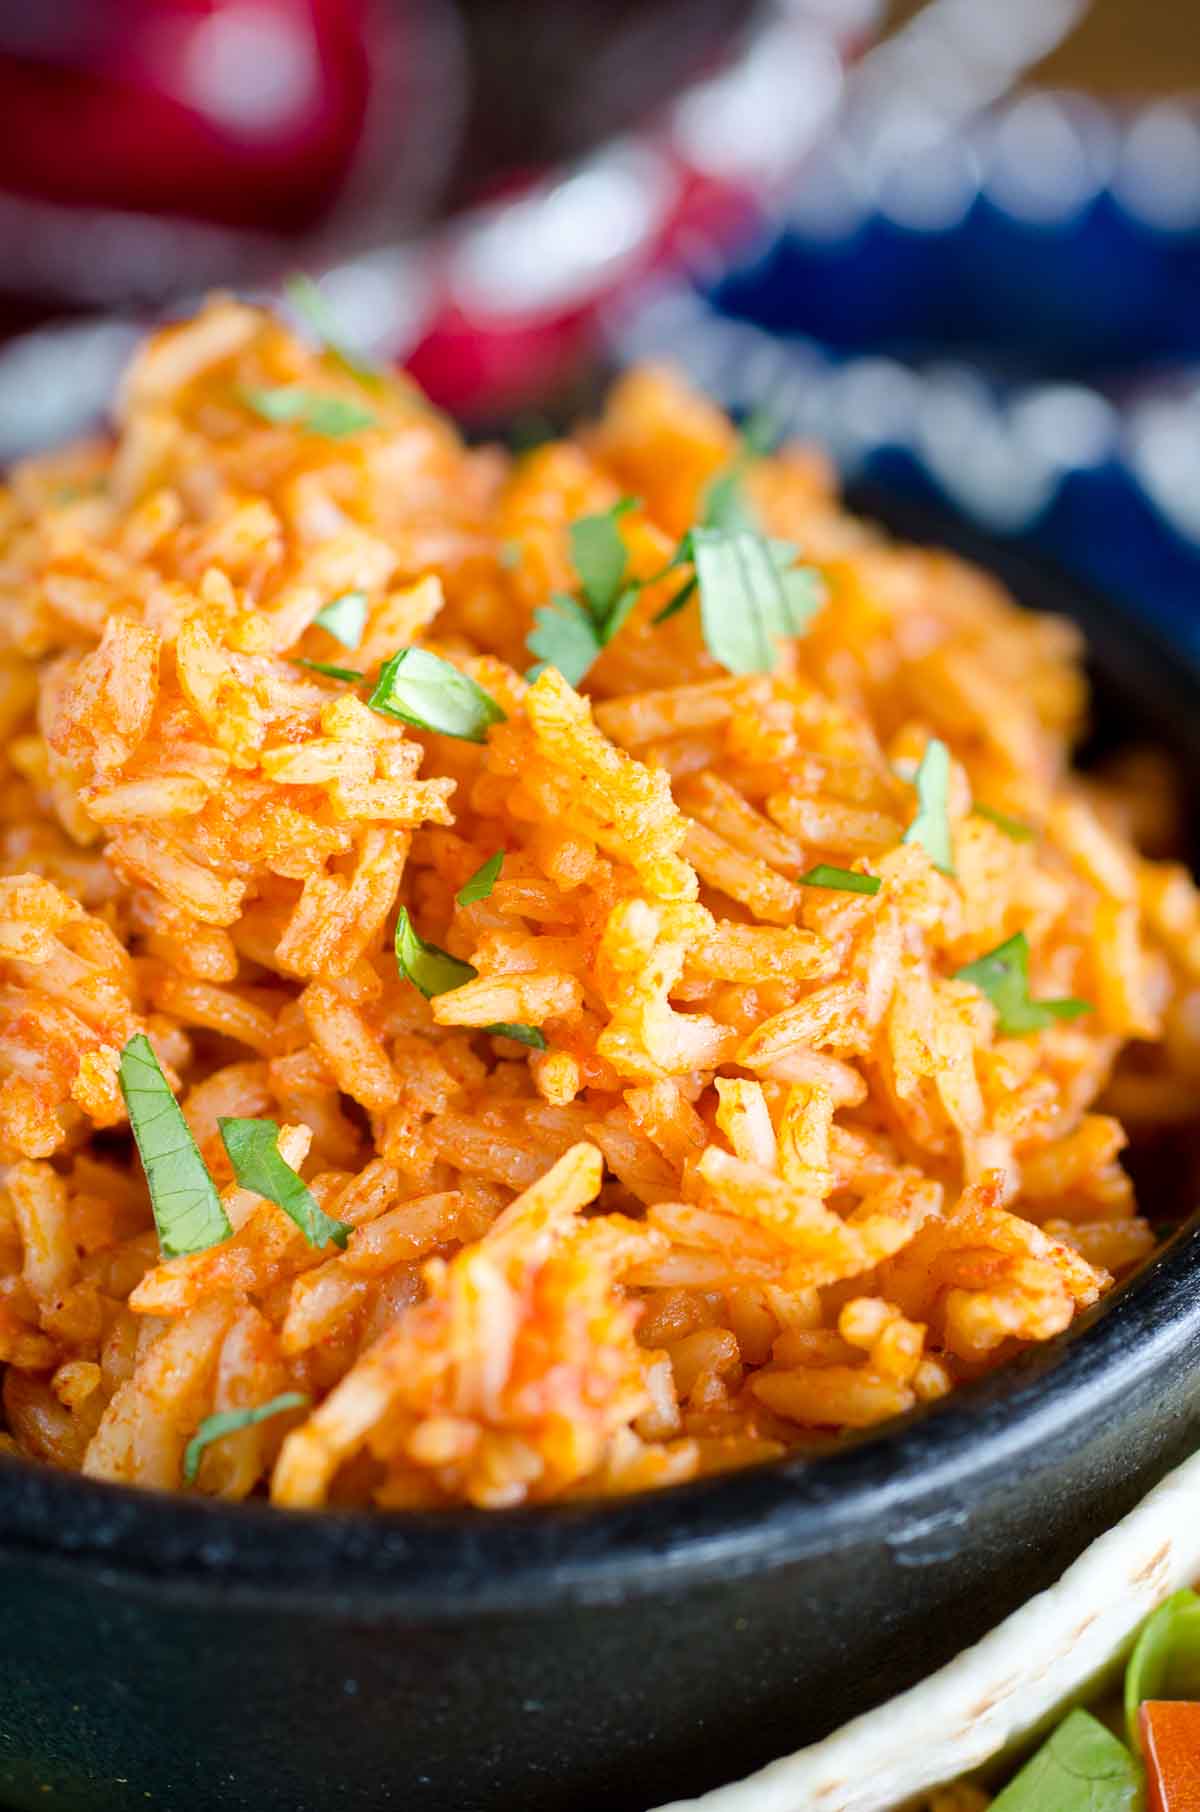 15 Delicious Mexican Spanish Rice Recipe – Easy Recipes To Make at Home